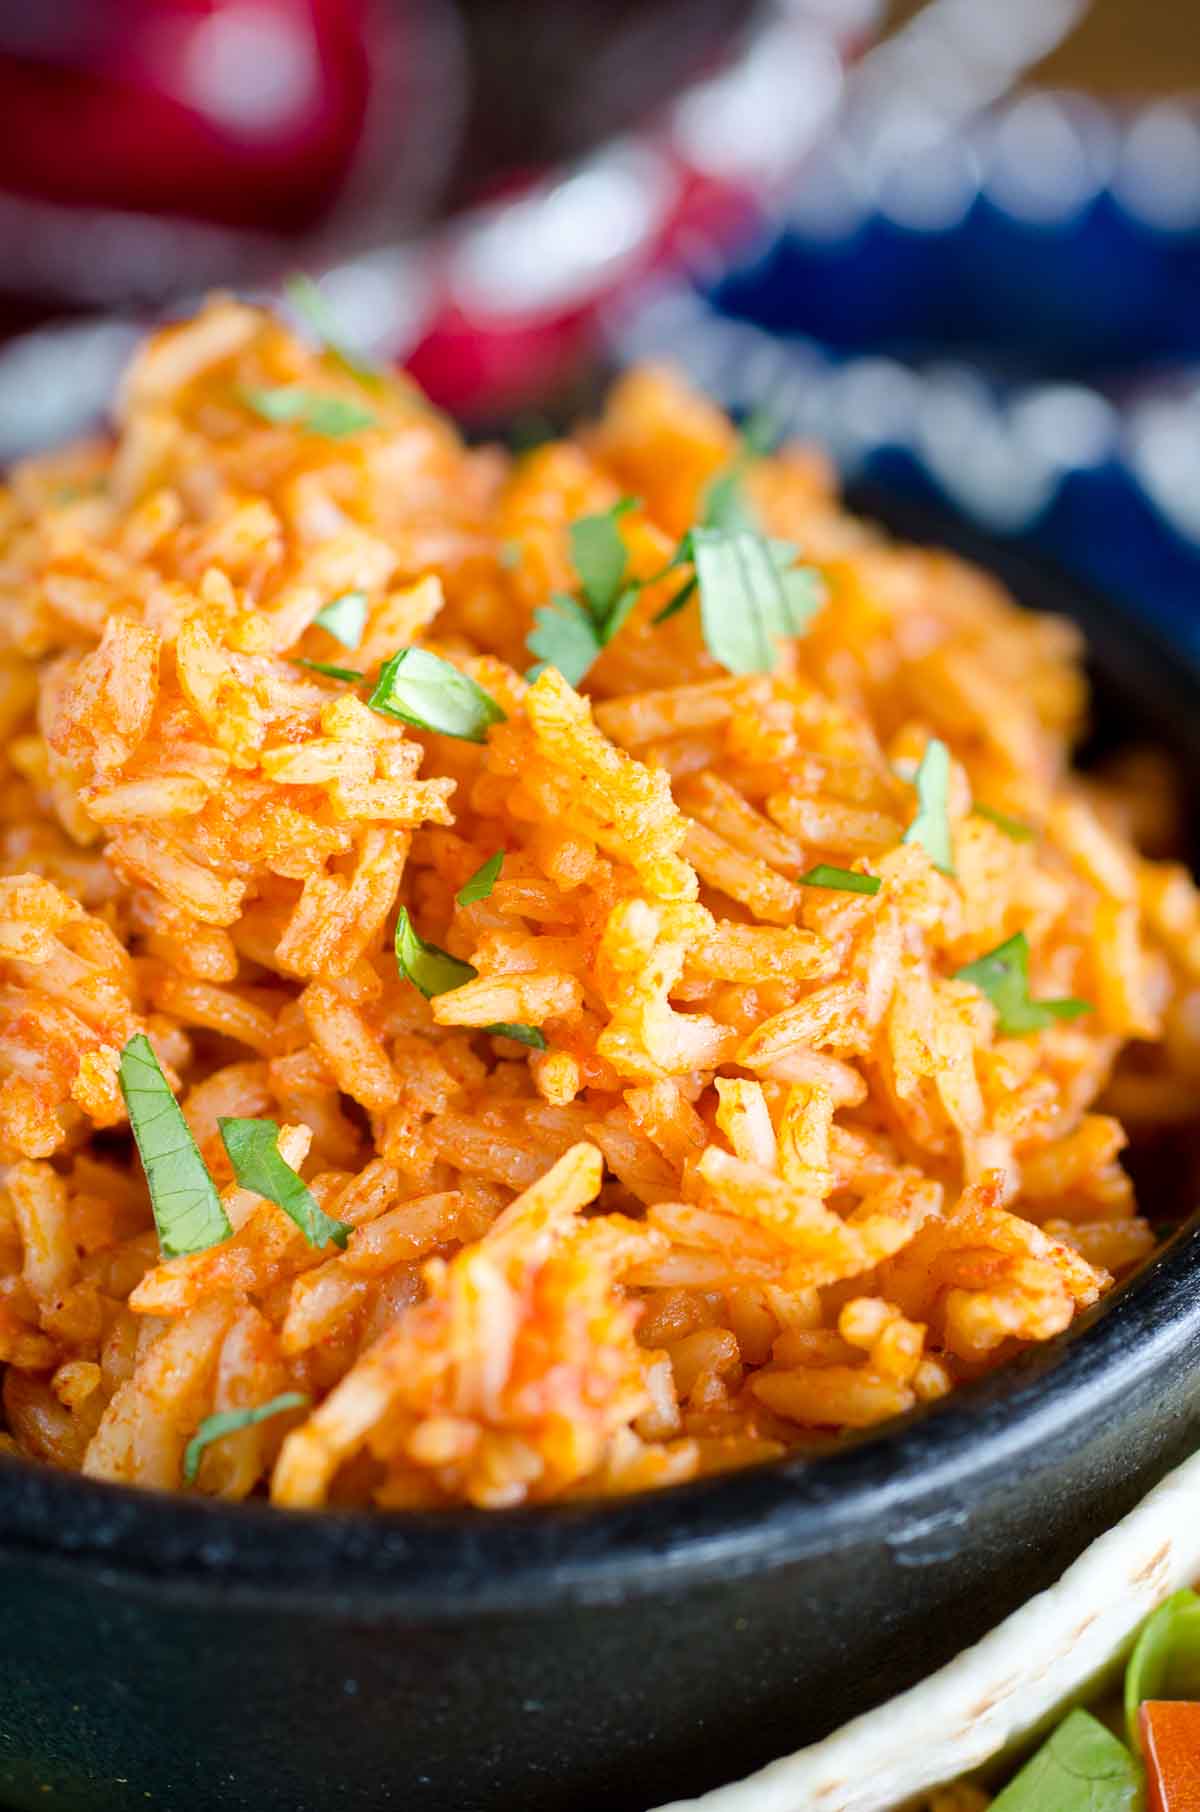 15 Delicious Mexican Spanish Rice Recipe – Easy Recipes To Make at Home